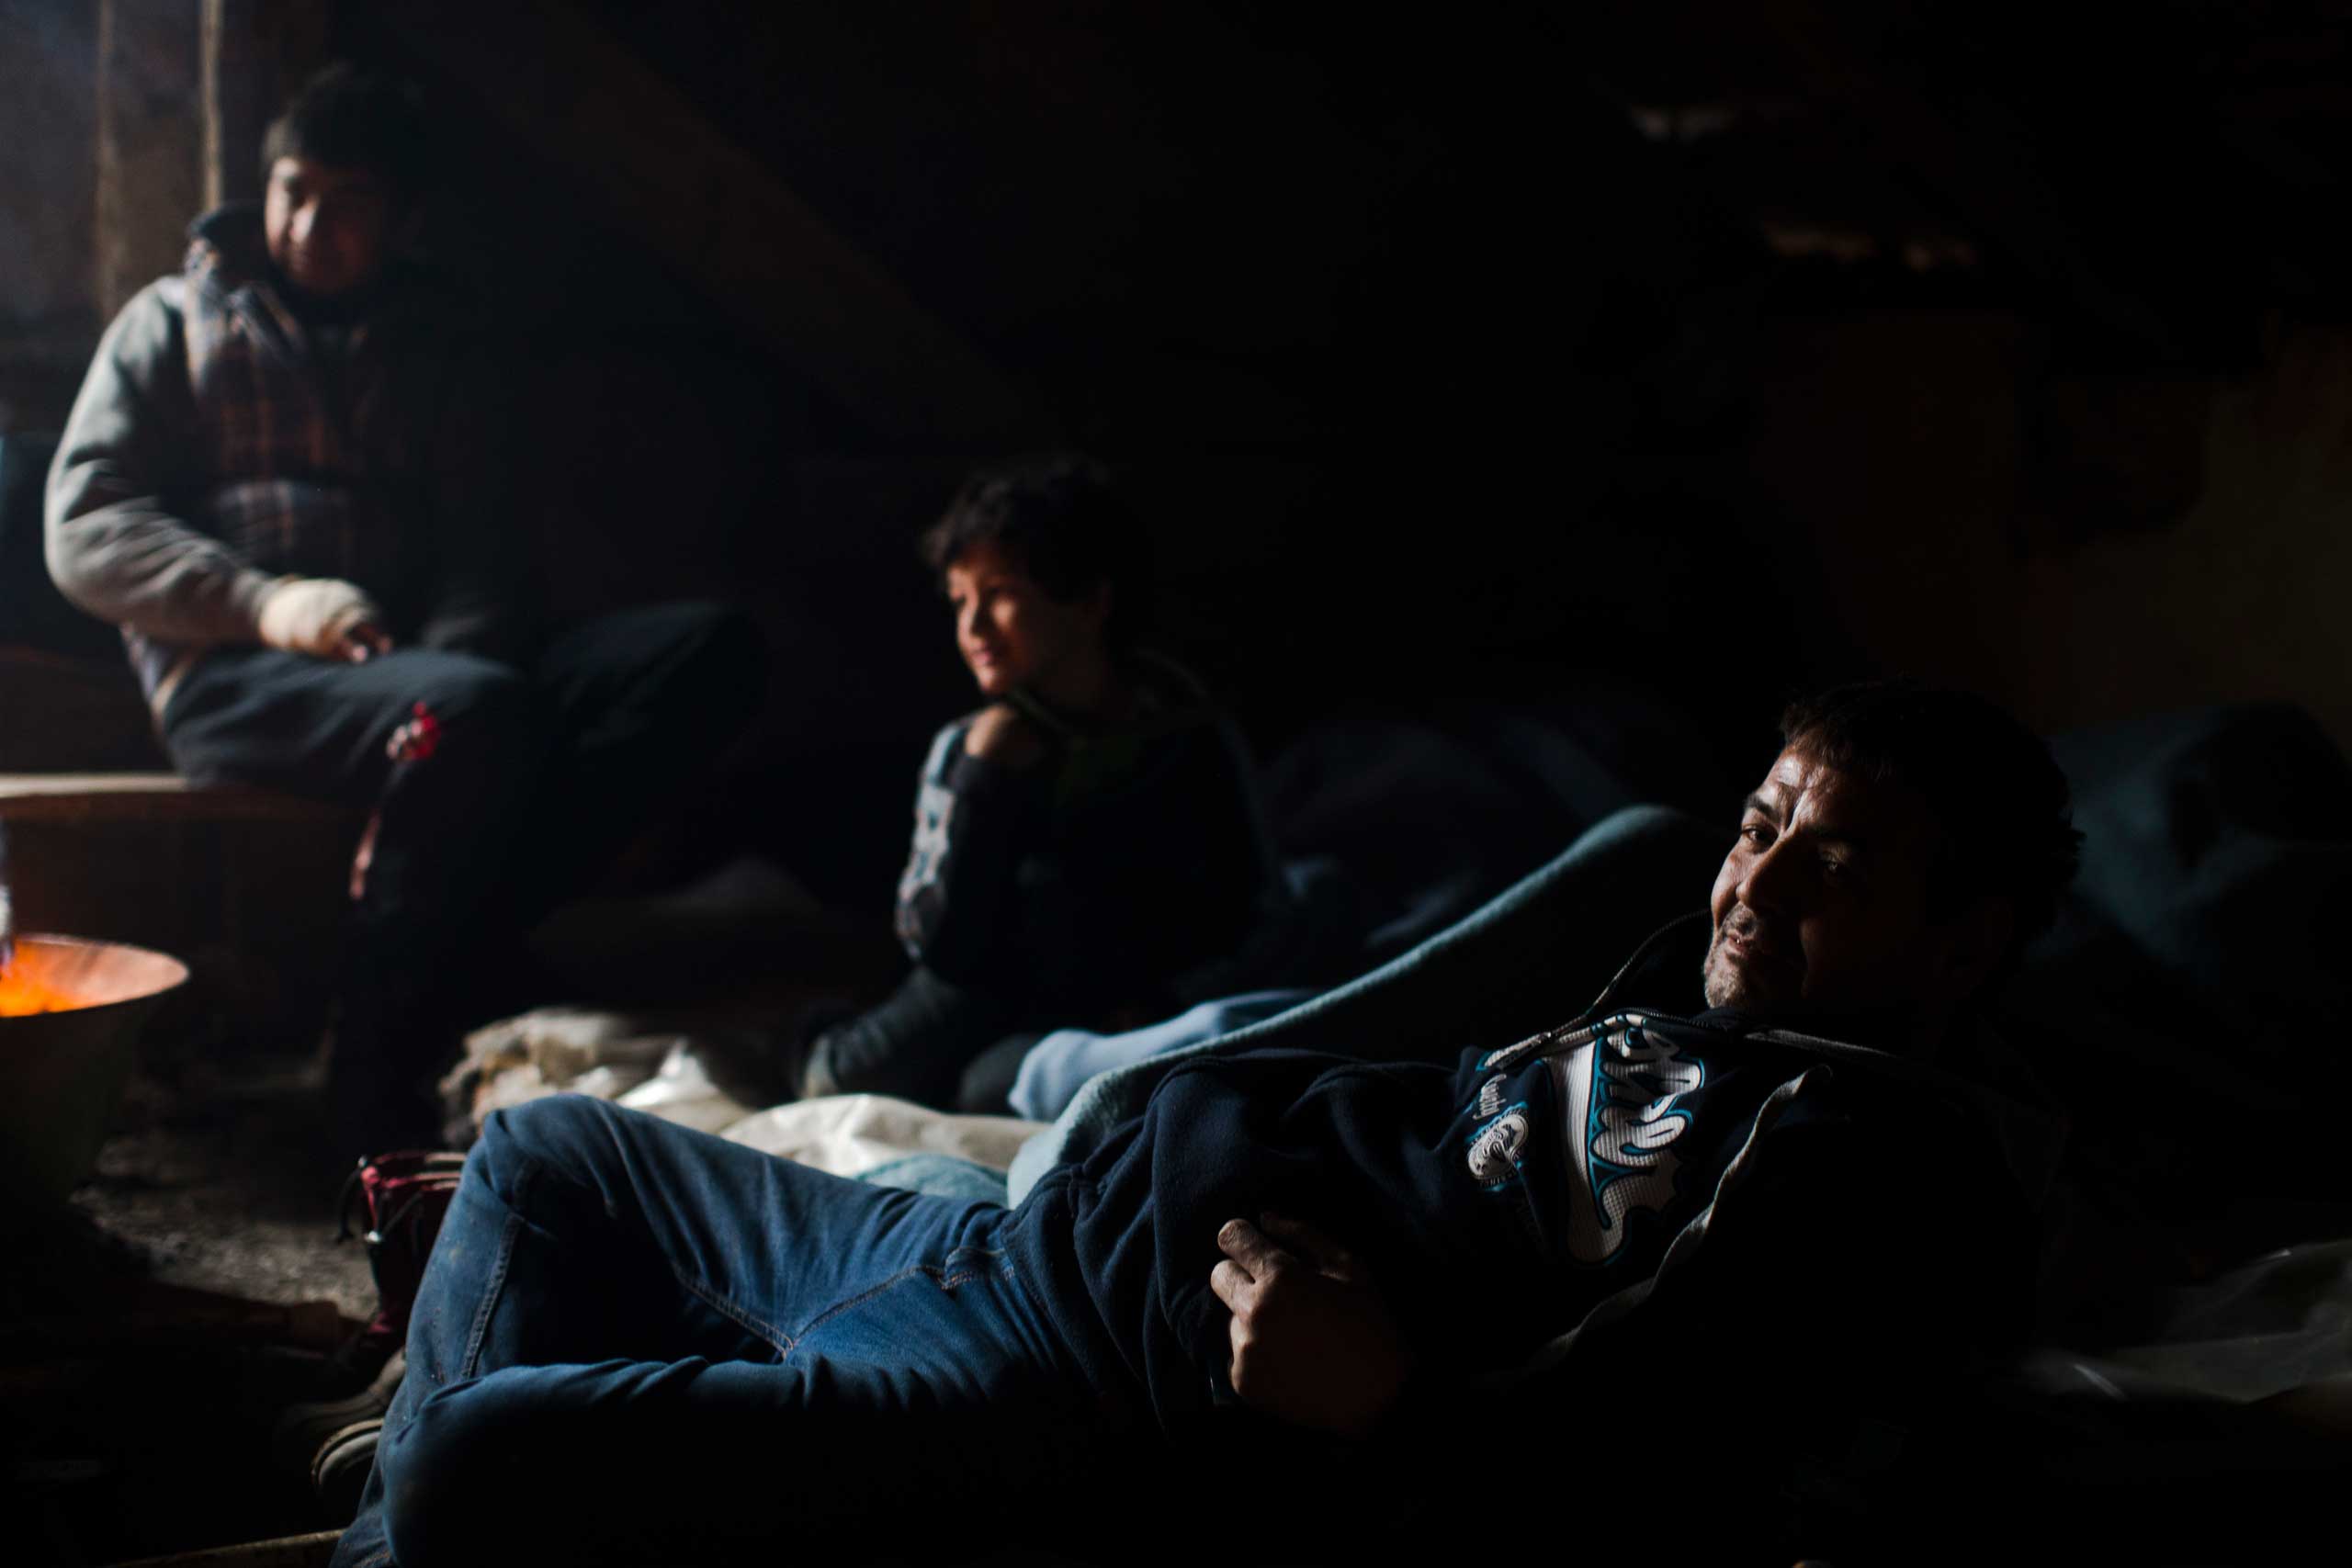 Migrants from Afghanistan rest at an abandoned house on the outskirts of Subotica, 90 miles north of Belgrade, Serbia on Feb. 26, 2015,